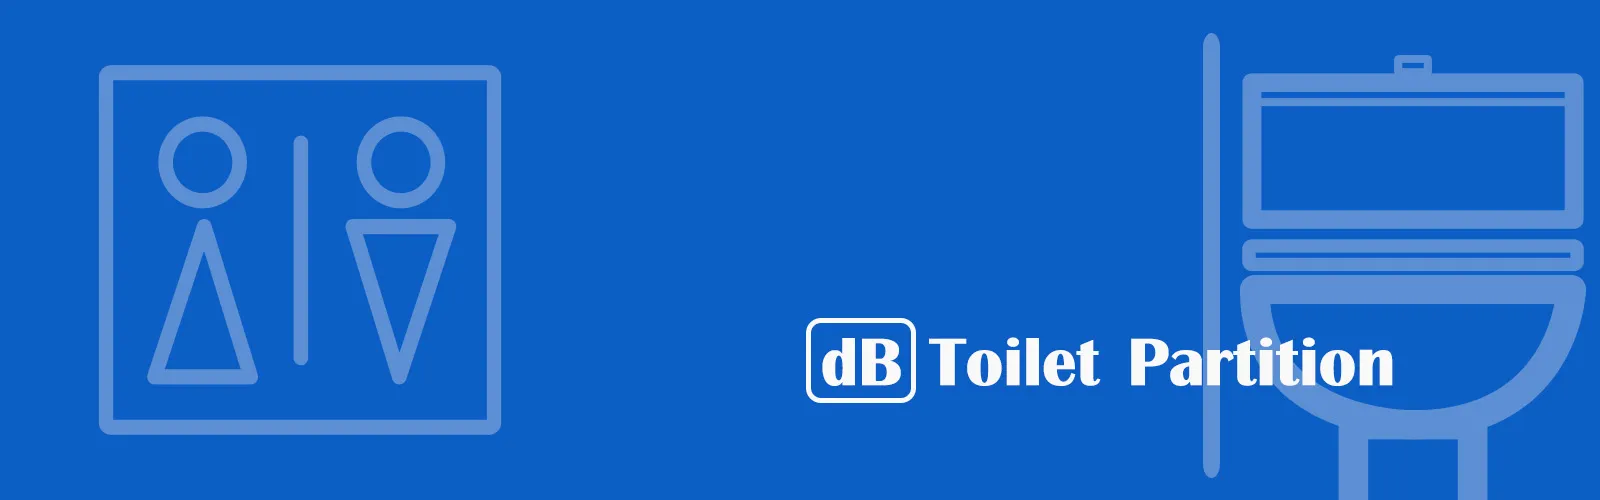 dB toilet partition banner01